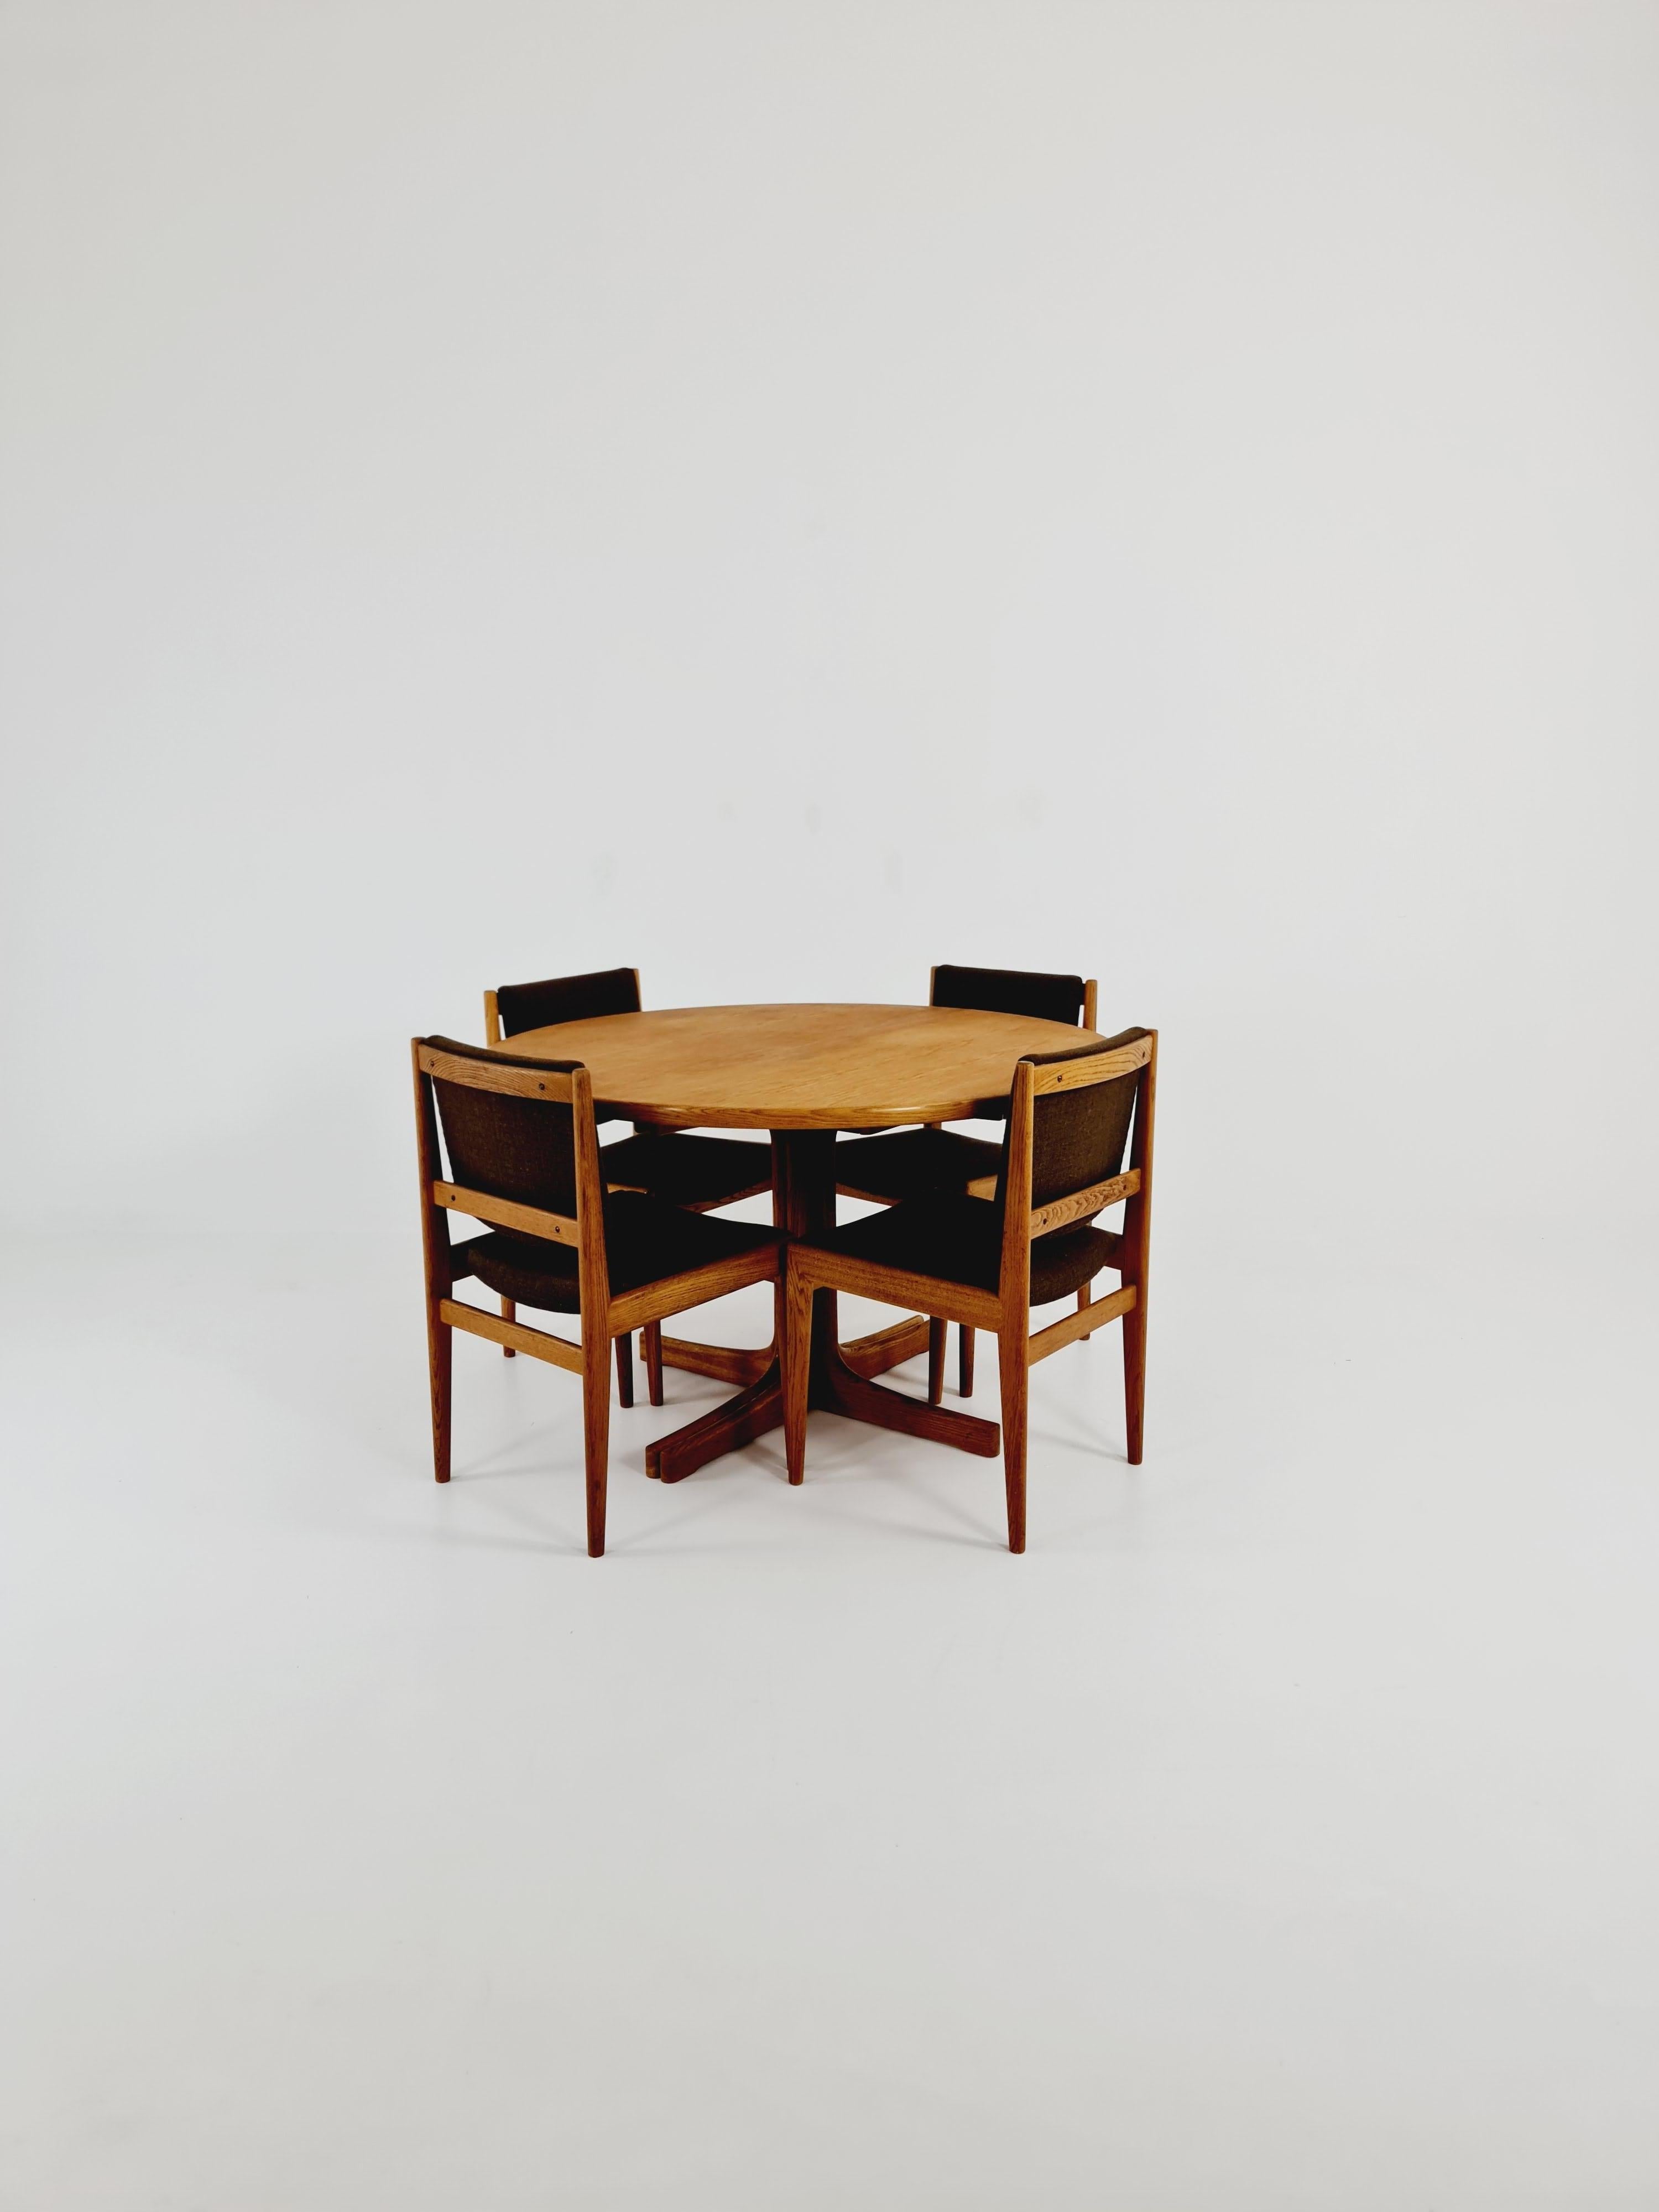 Mid century Swedish Modern Oak dining table by Karl Erik Ekselius, 1960s


The table is in good condition.

measurements

Height: 73 cm
Width: 120 -- Adjustable -- 180 up to -240 cm
Depth: 120cm